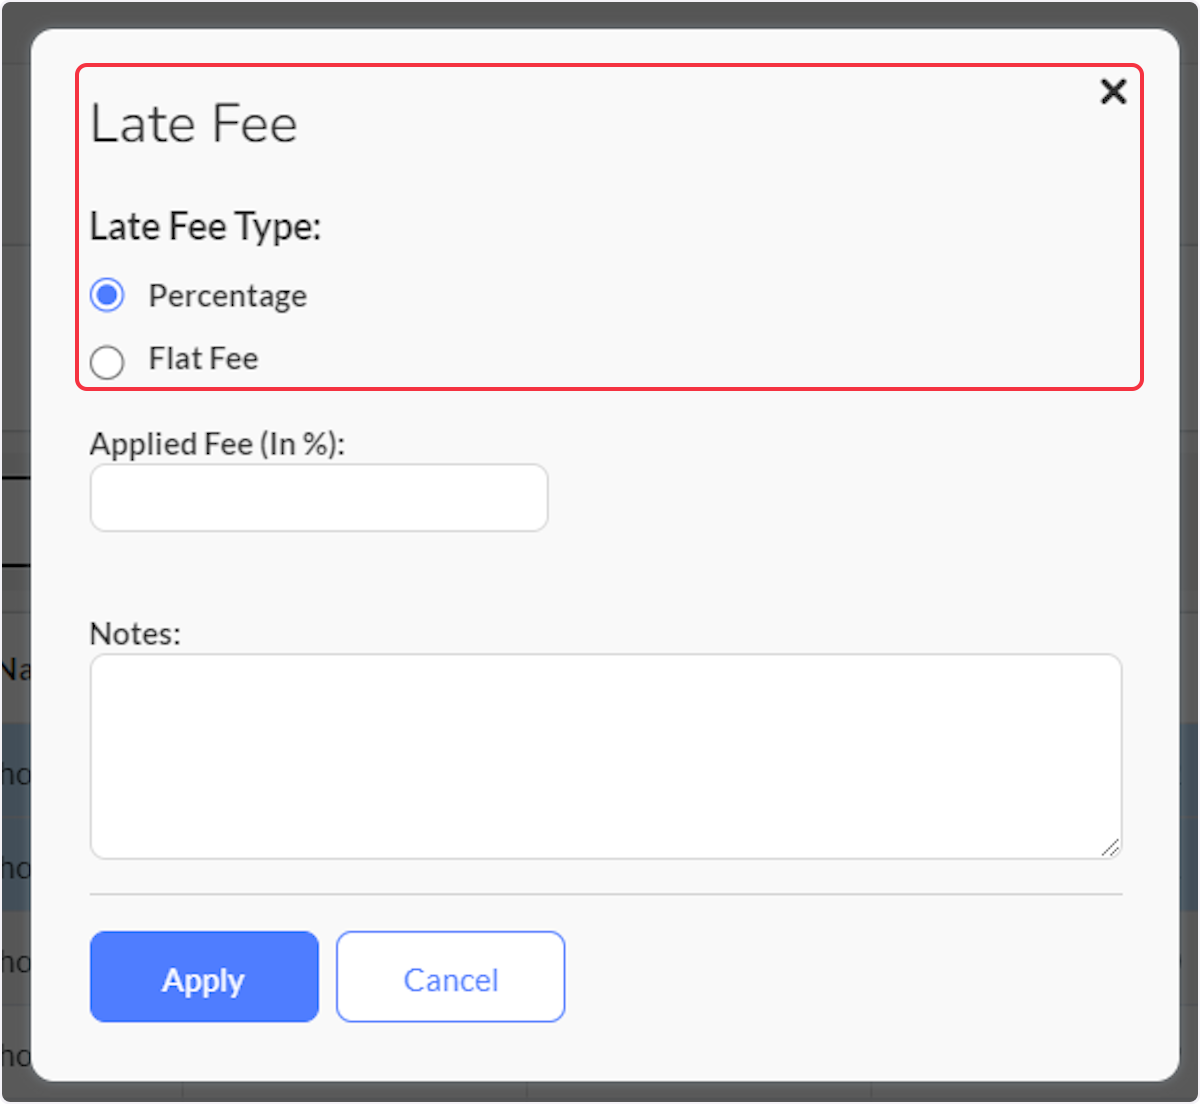 Late fees can be added as a Percentage or Flat Fee.